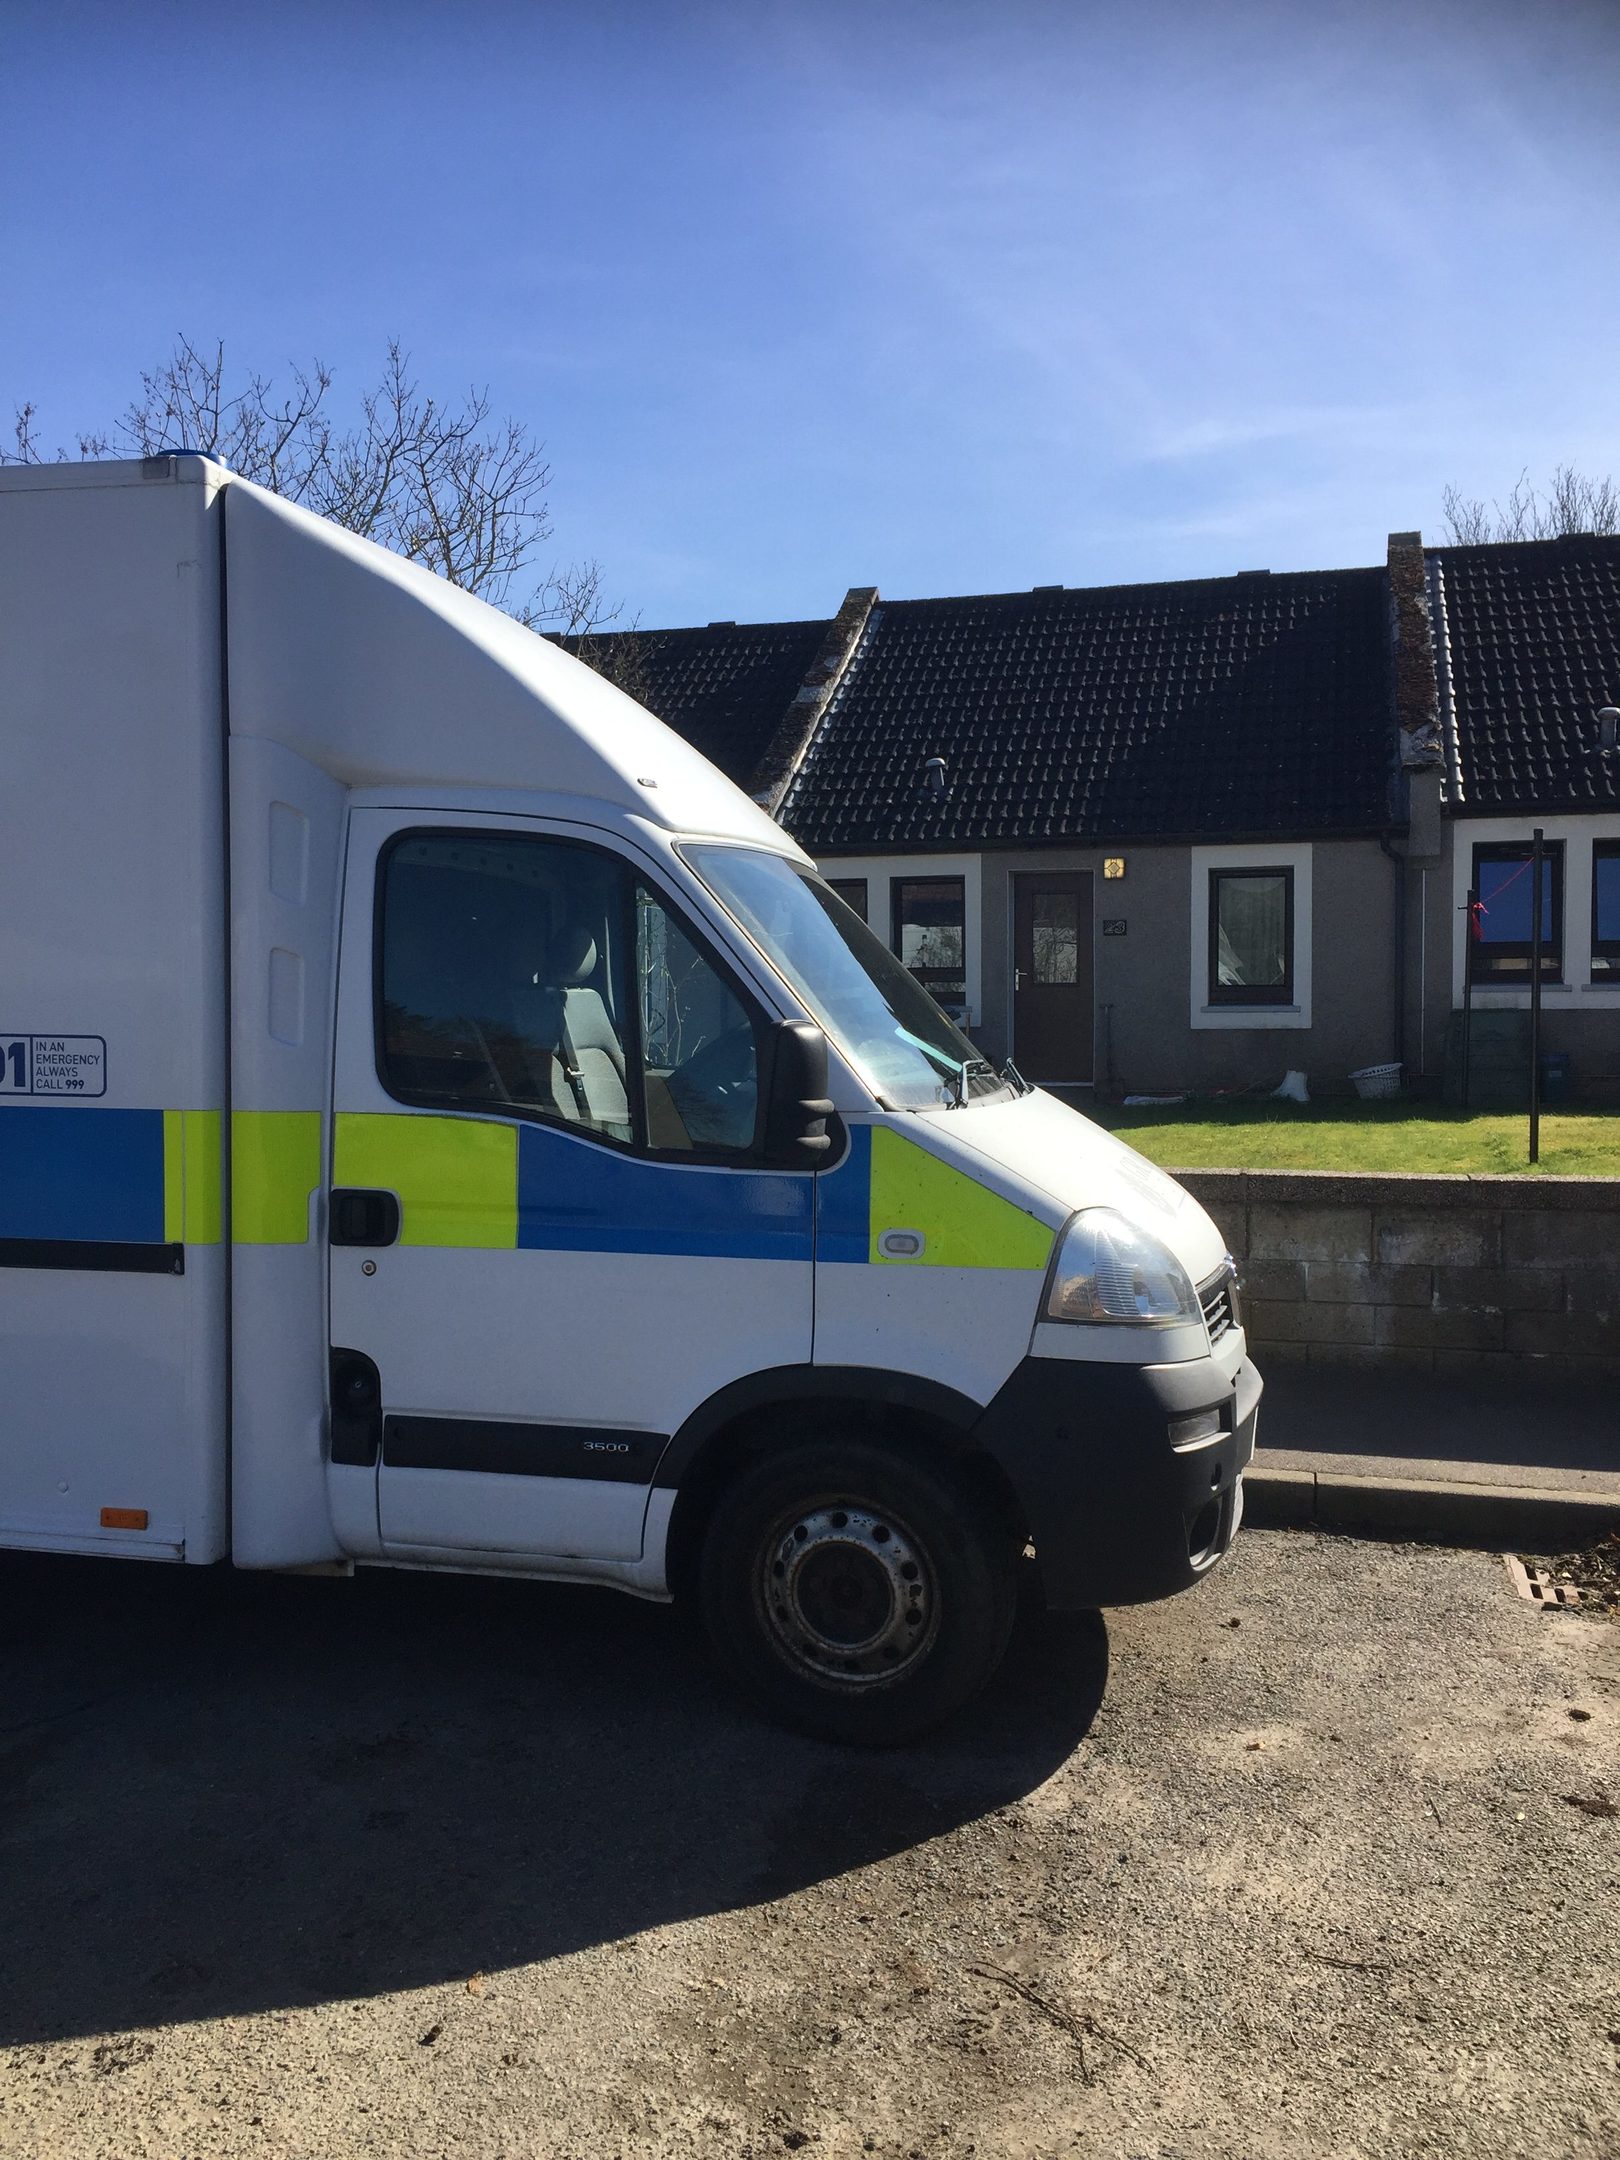 A police van stands guard outside the property at St Andrew's, Monymusk